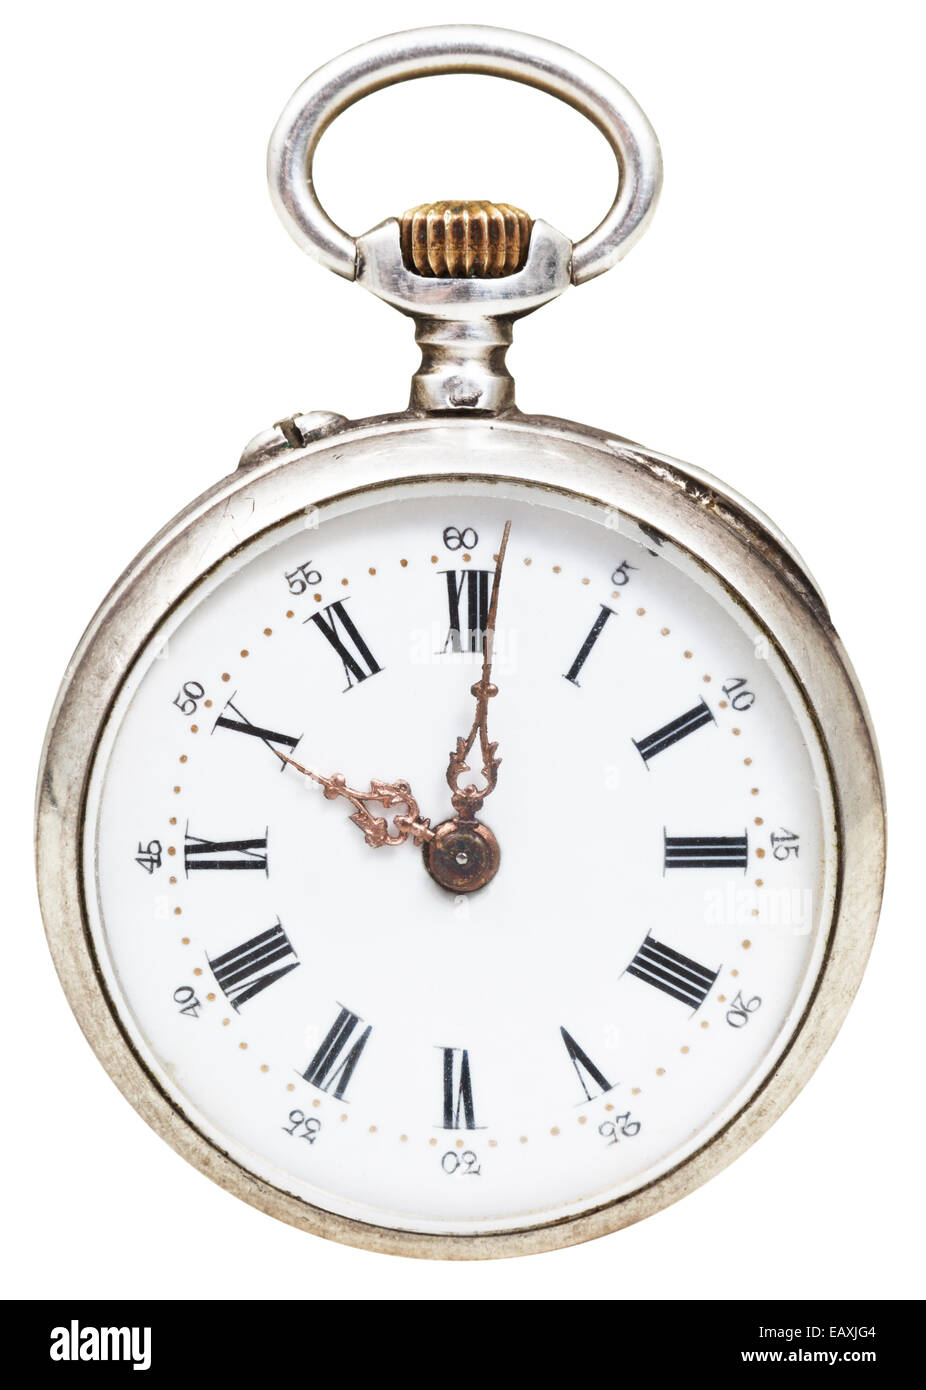 ten o'clock on the dial of retro pocket watch isolated on white background Stock Photo